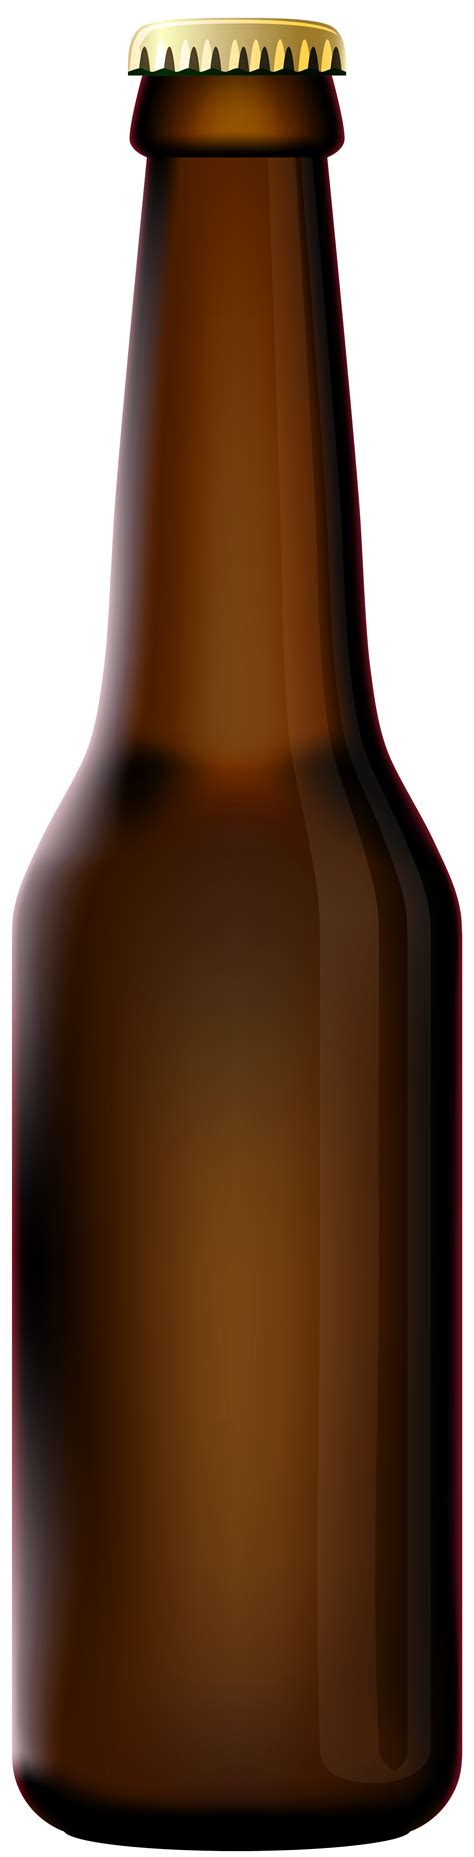 16700 Beer Bottle Illustrations Royalty Free Vector Graphics Clip Art Library